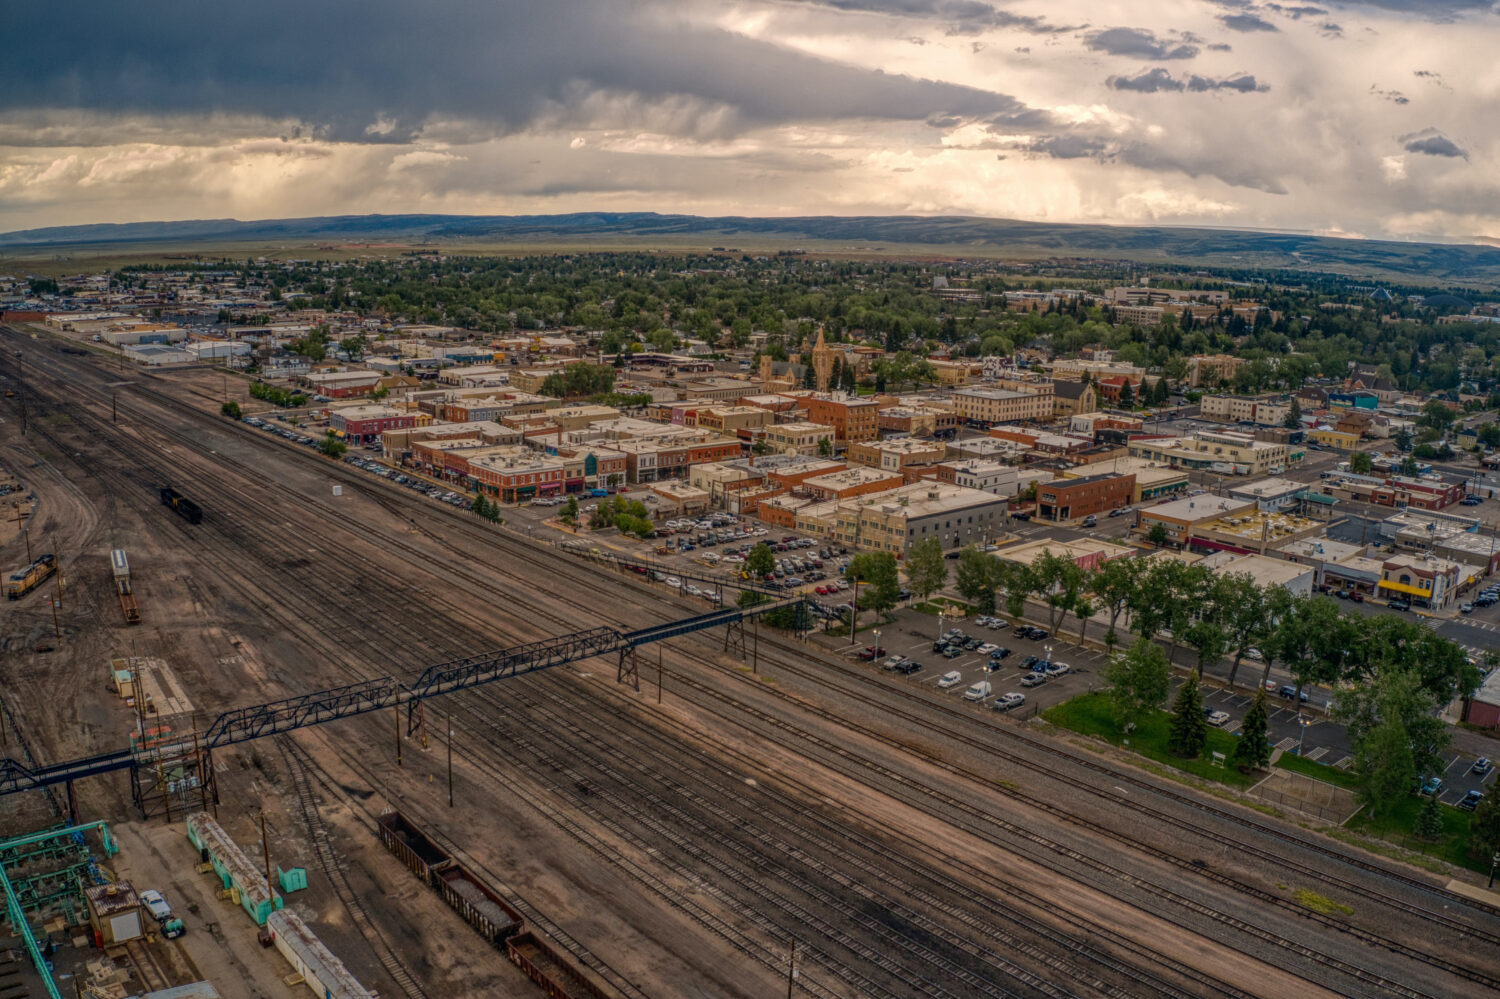 Laramie is the third-most populous city in Wyoming after Cheyenne and Casper. <a>©Jacob Boomsma/Shutterstock.com</a>